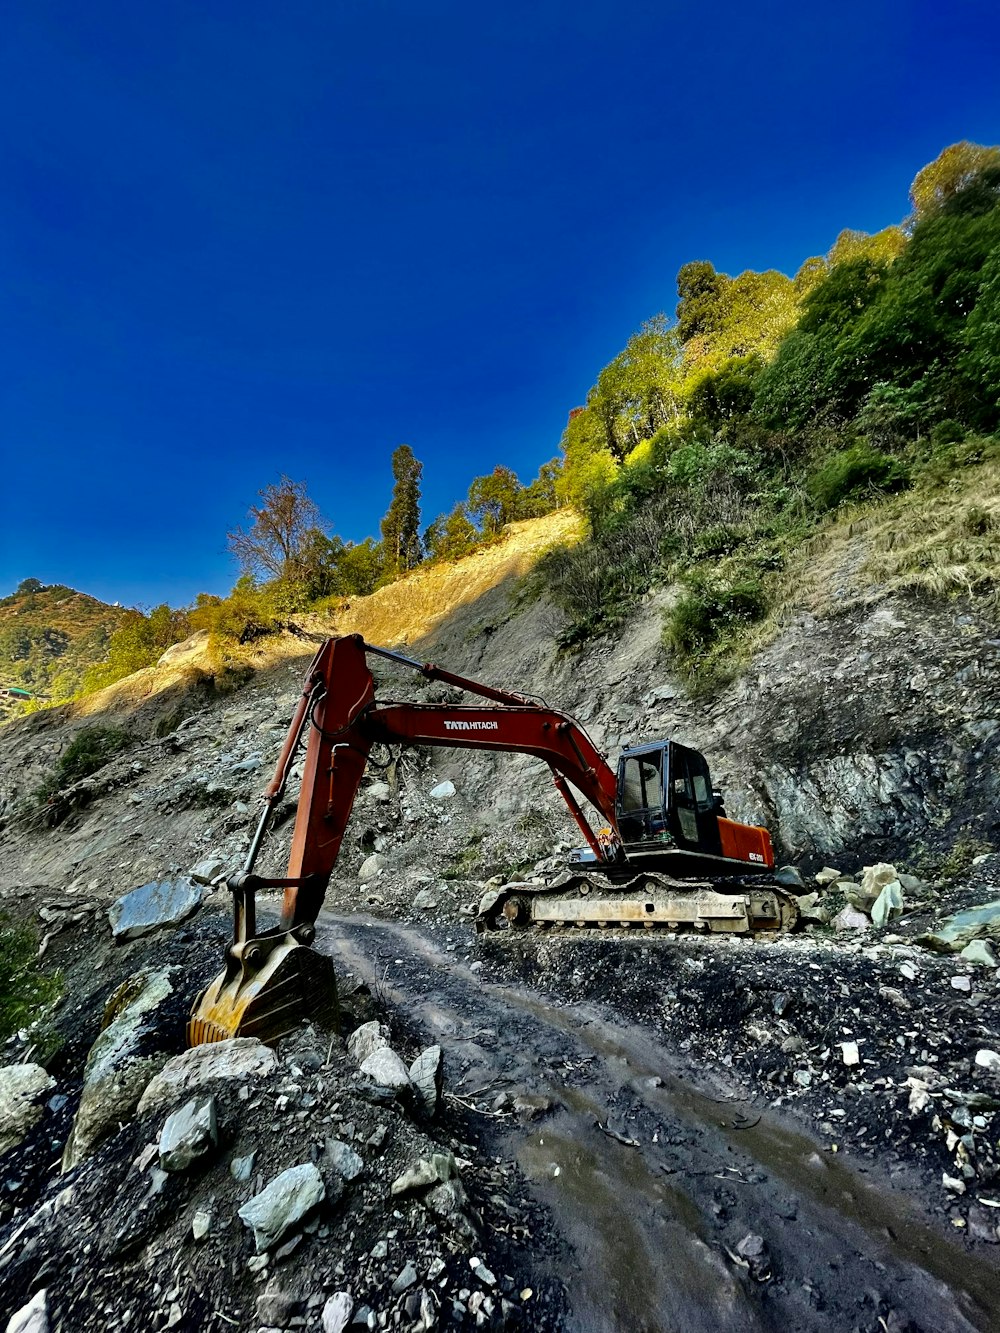 an excavator digging through a rocky area